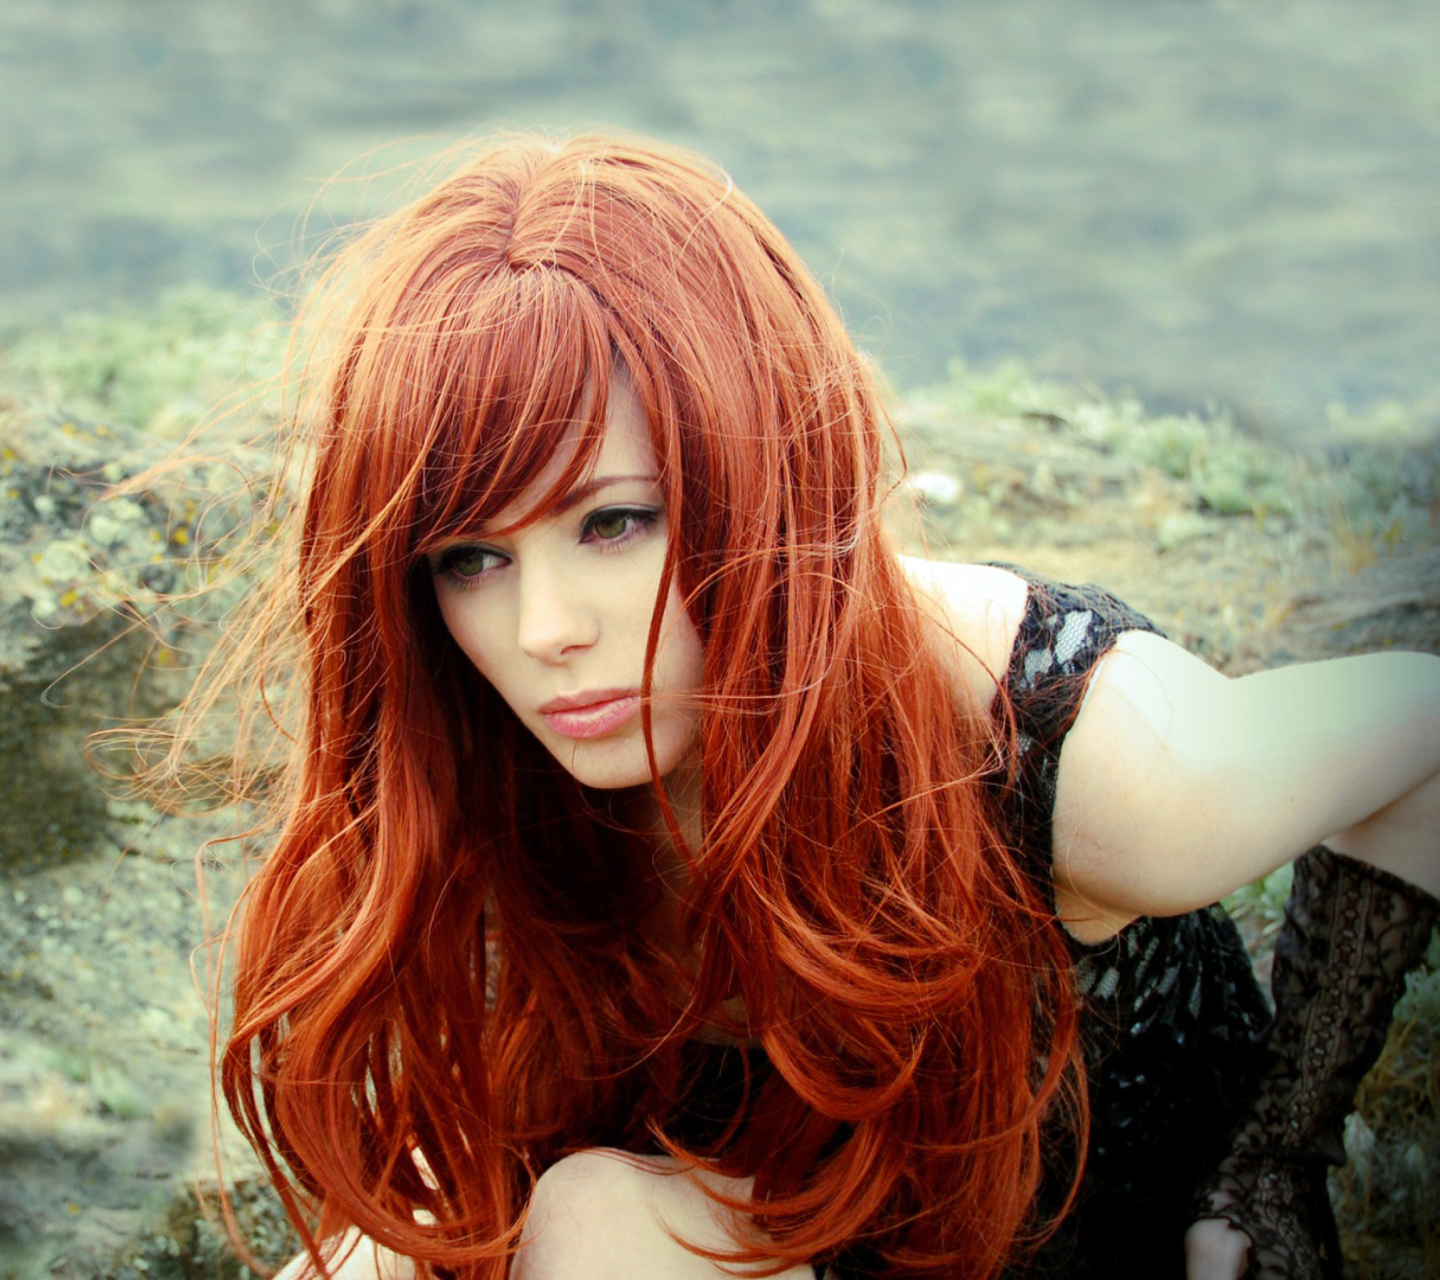 Gorgeous Red Hair Girl With Green Eyes screenshot #1 1440x1280